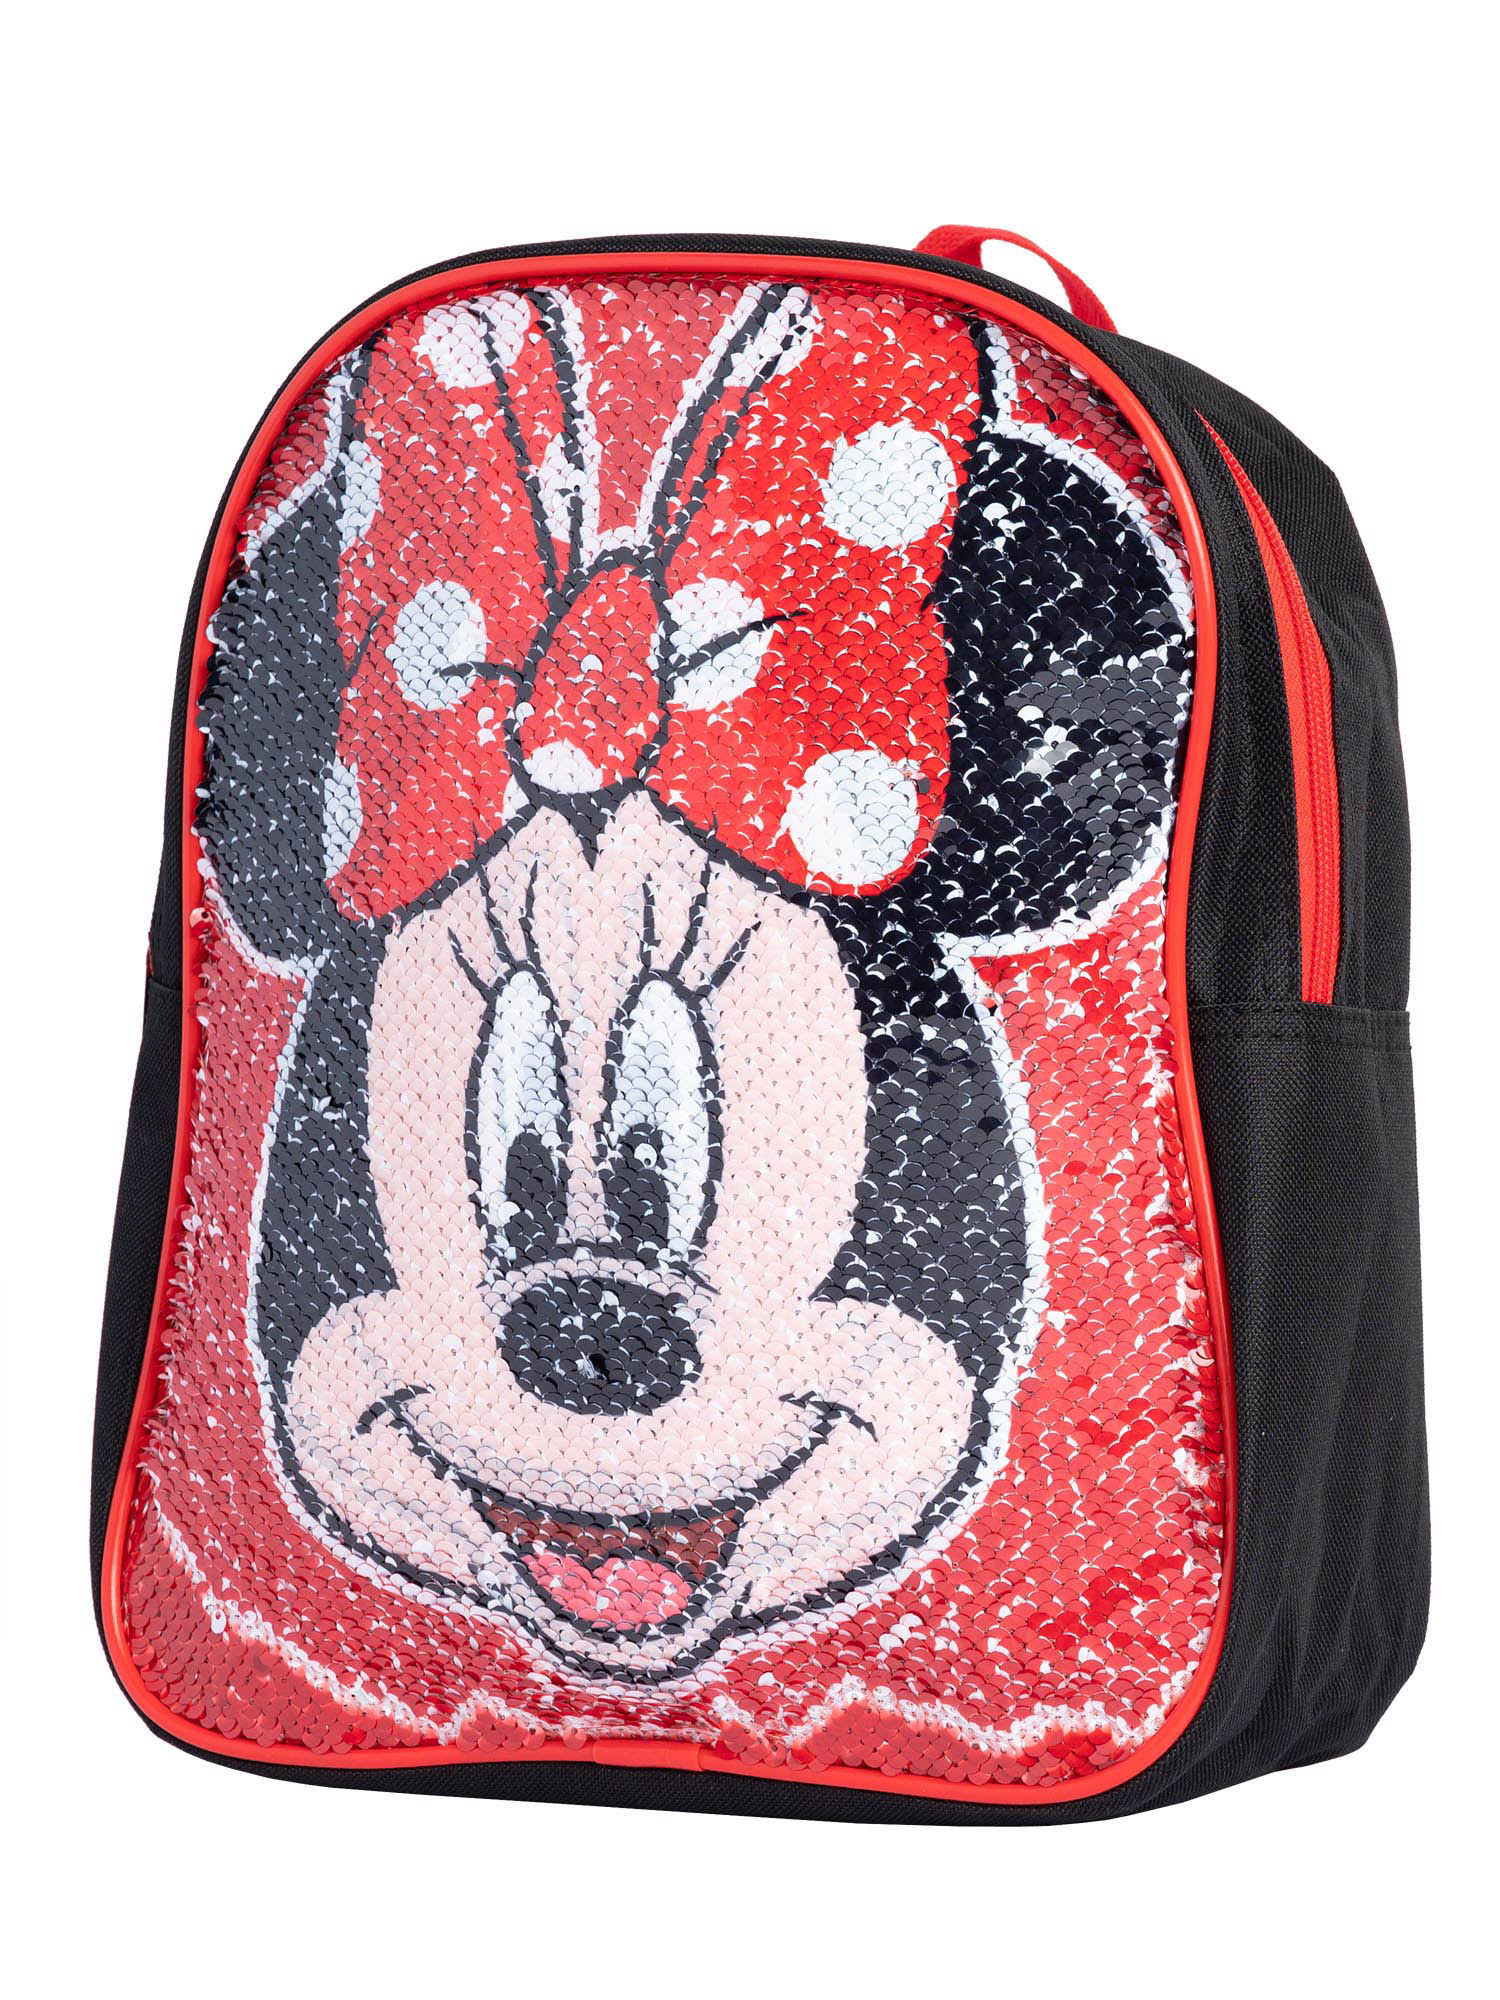 Disney Mickey & Minnie Mouse Backpack 12" Reversible Sequins Black Red - image 1 of 4